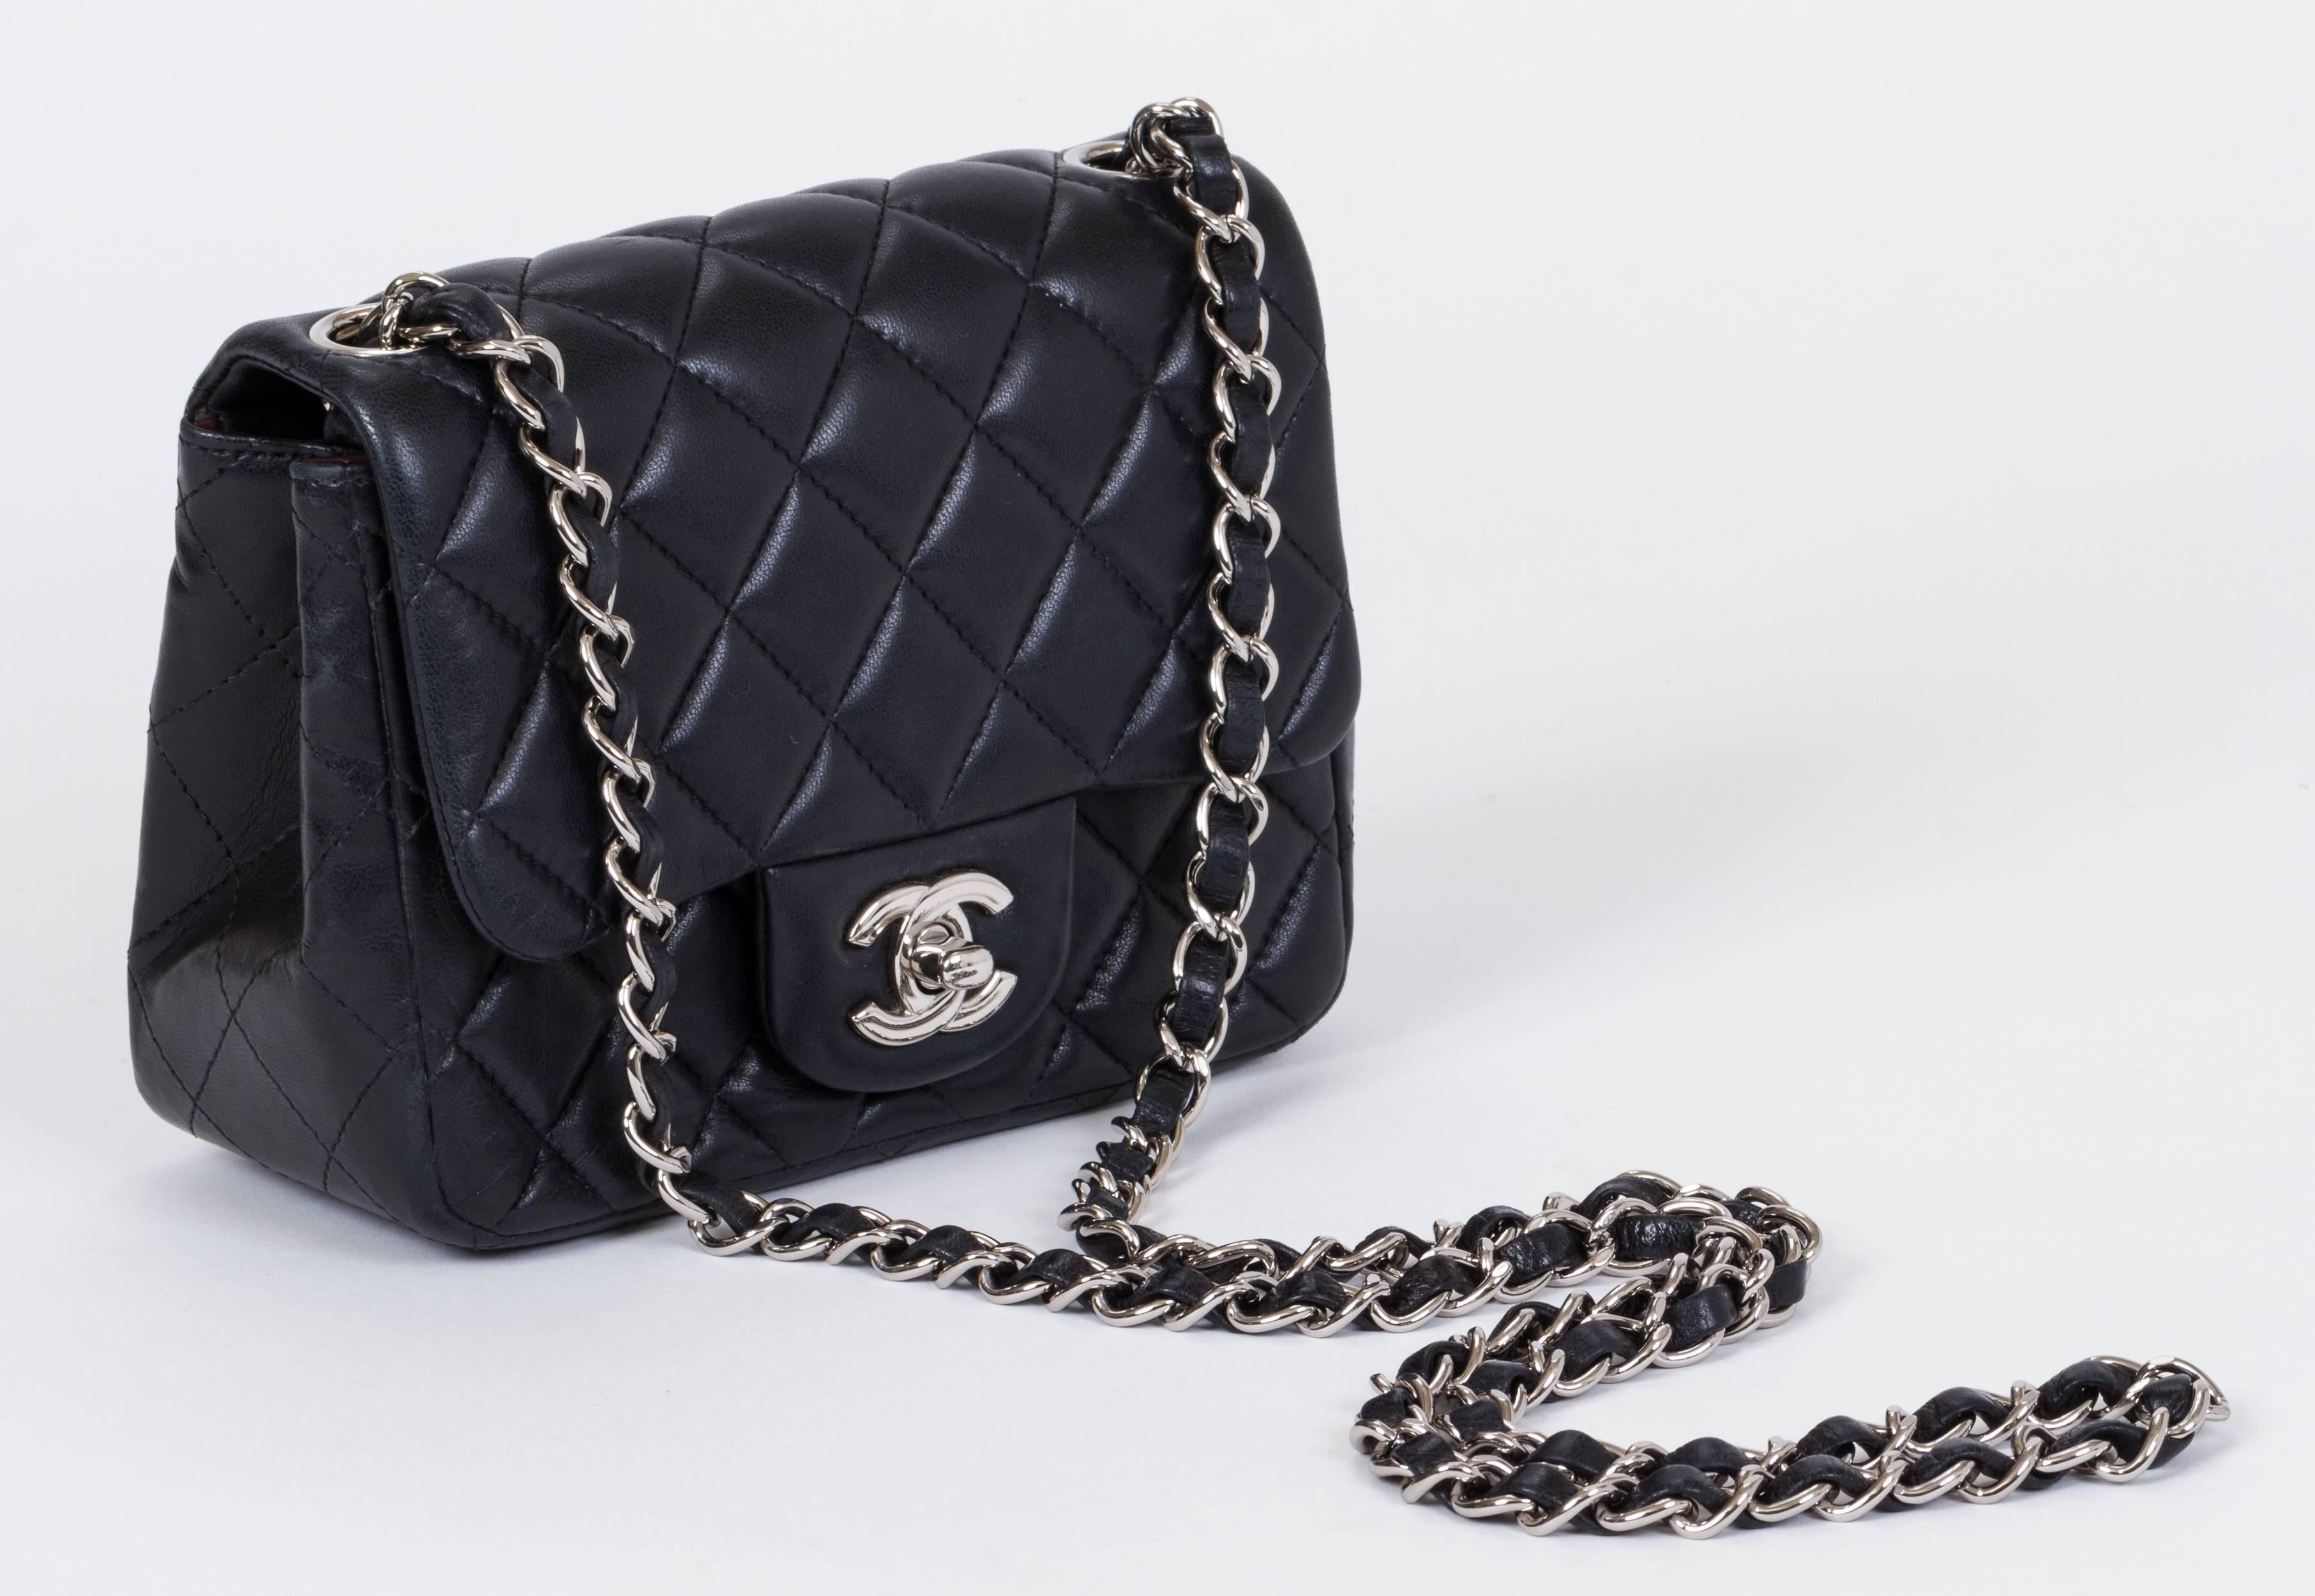 Chanel black lambskin quilted cross body mini flap bag. One exterior back pocket and one interior zipped compartment. Shoulder drop 21